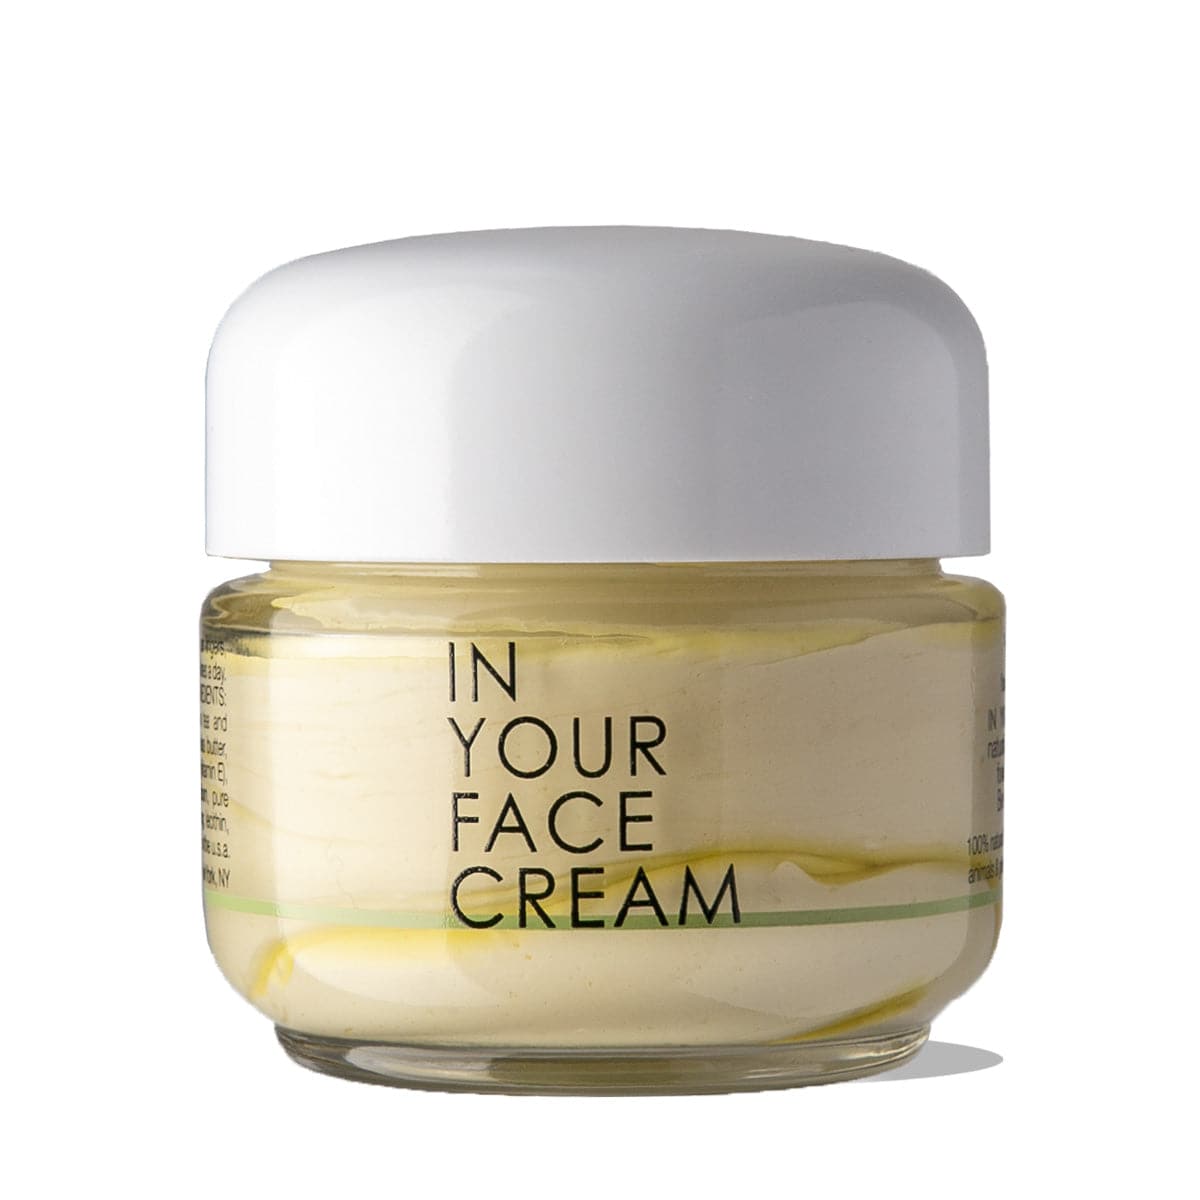 a jar of IN YOUR FACE CREAM on a plain white background. The cream is a buttery yellow color.